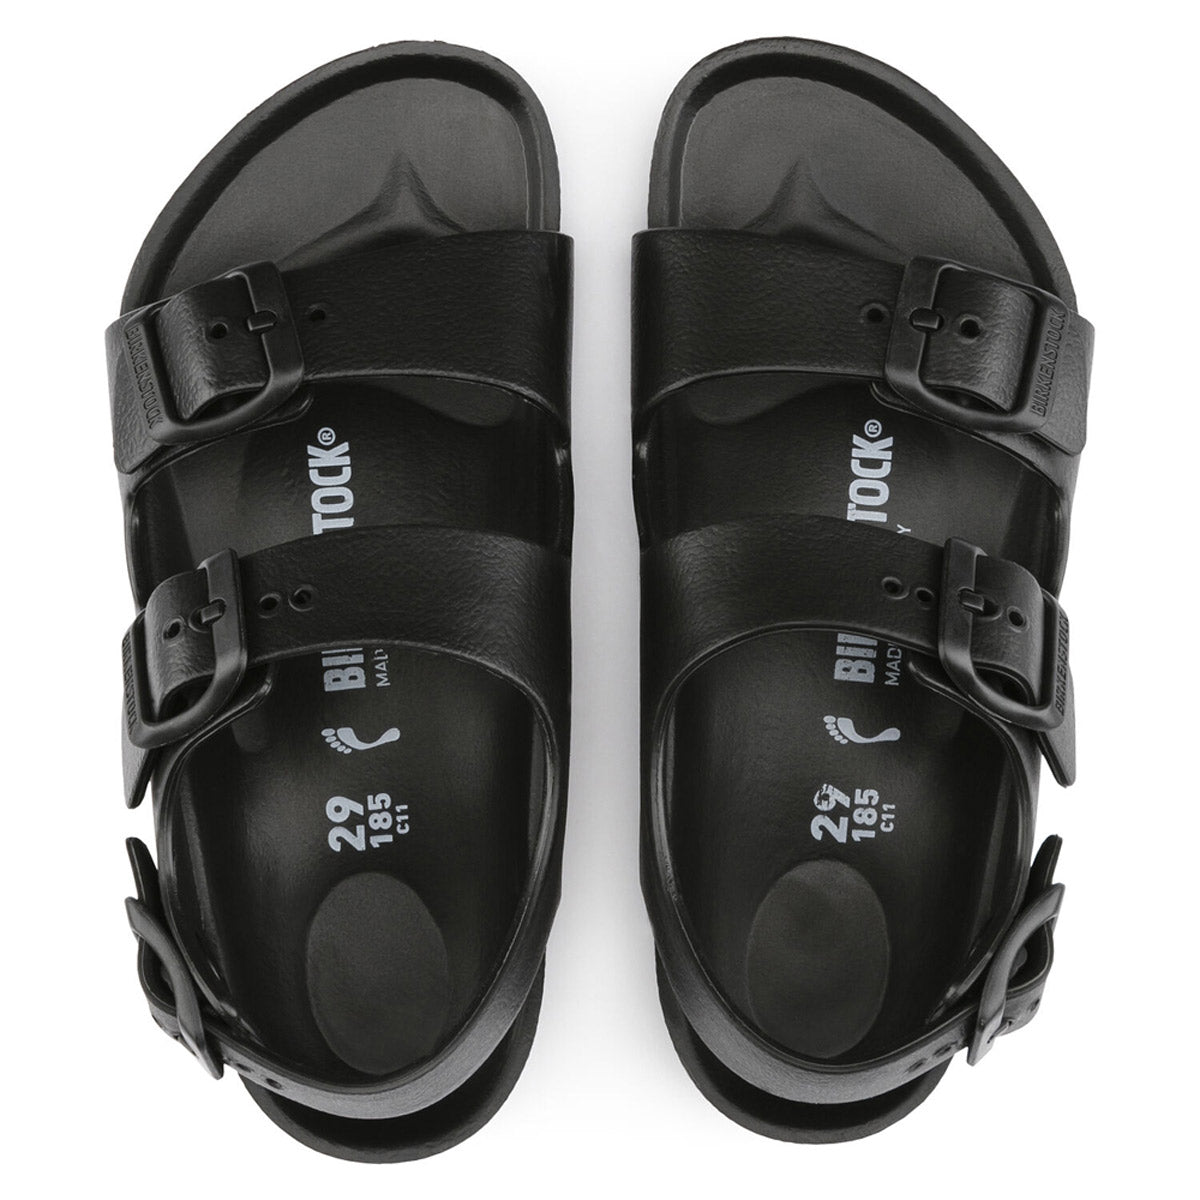 A pair of black Birkenstock Milano EVA Black - Kids sandals with adjustable straps displayed on a white background, featuring an anatomically shaped footbed.